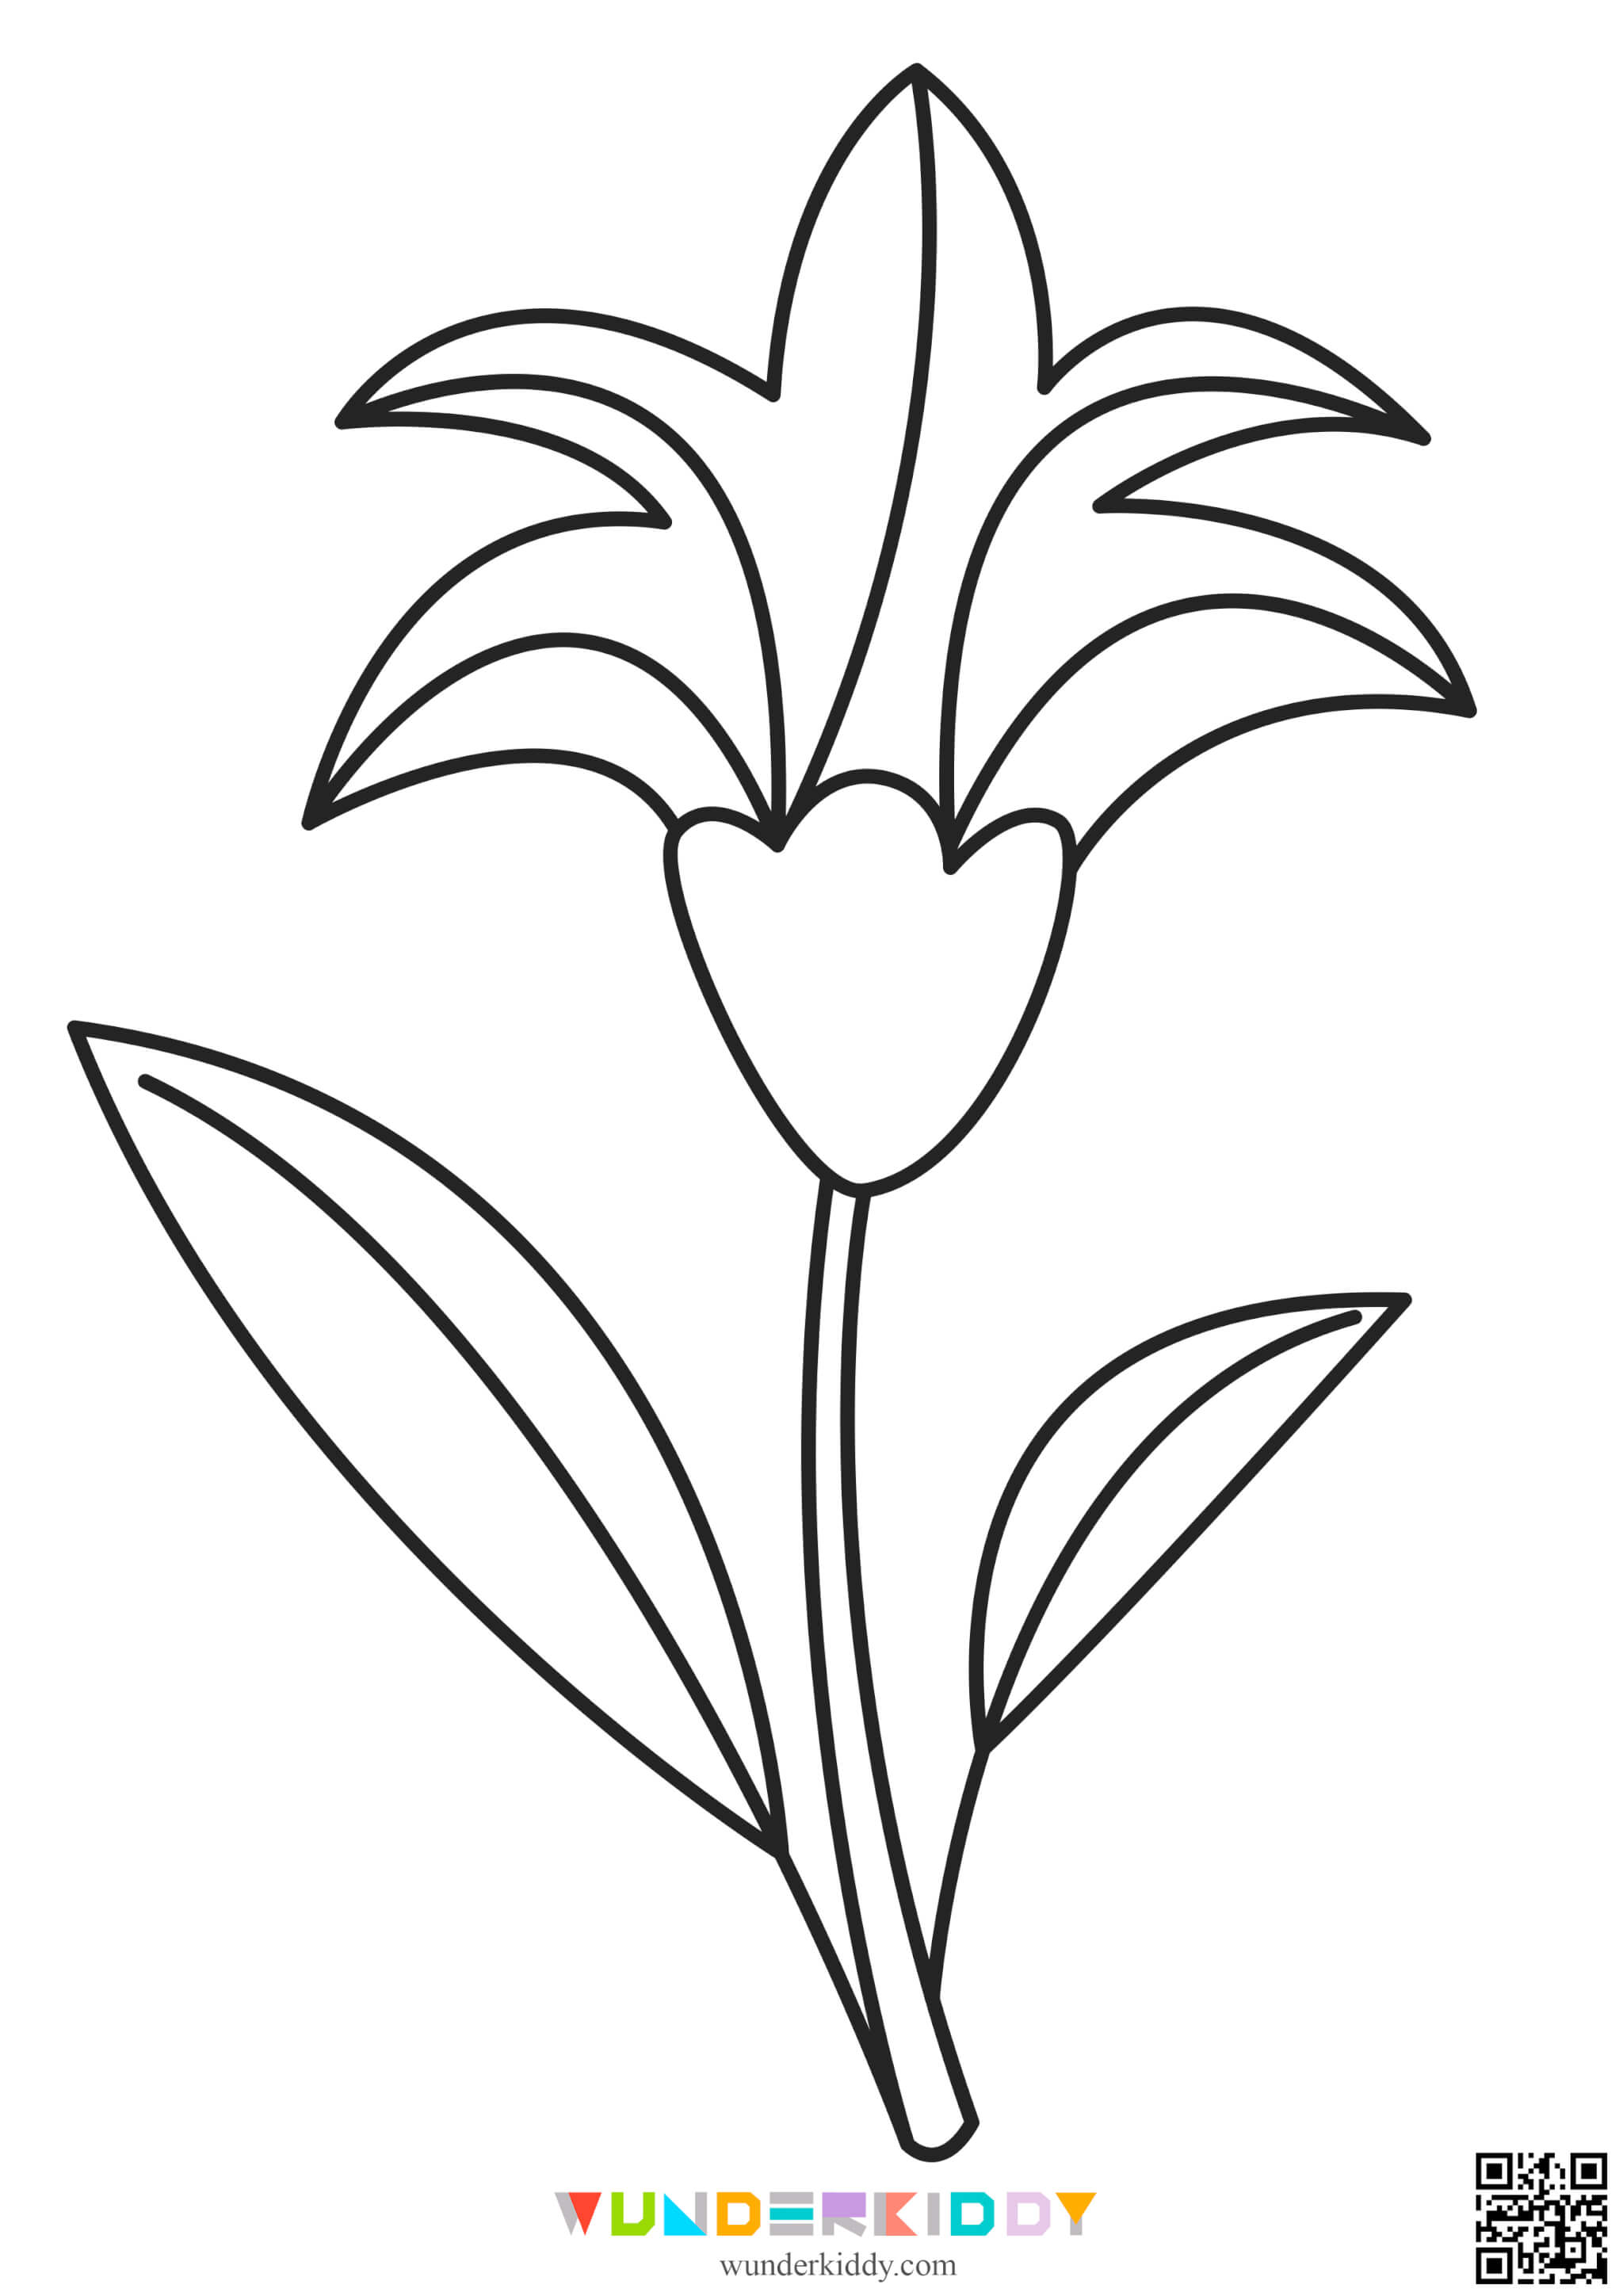 Flower Printable Coloring Pages - Image 20